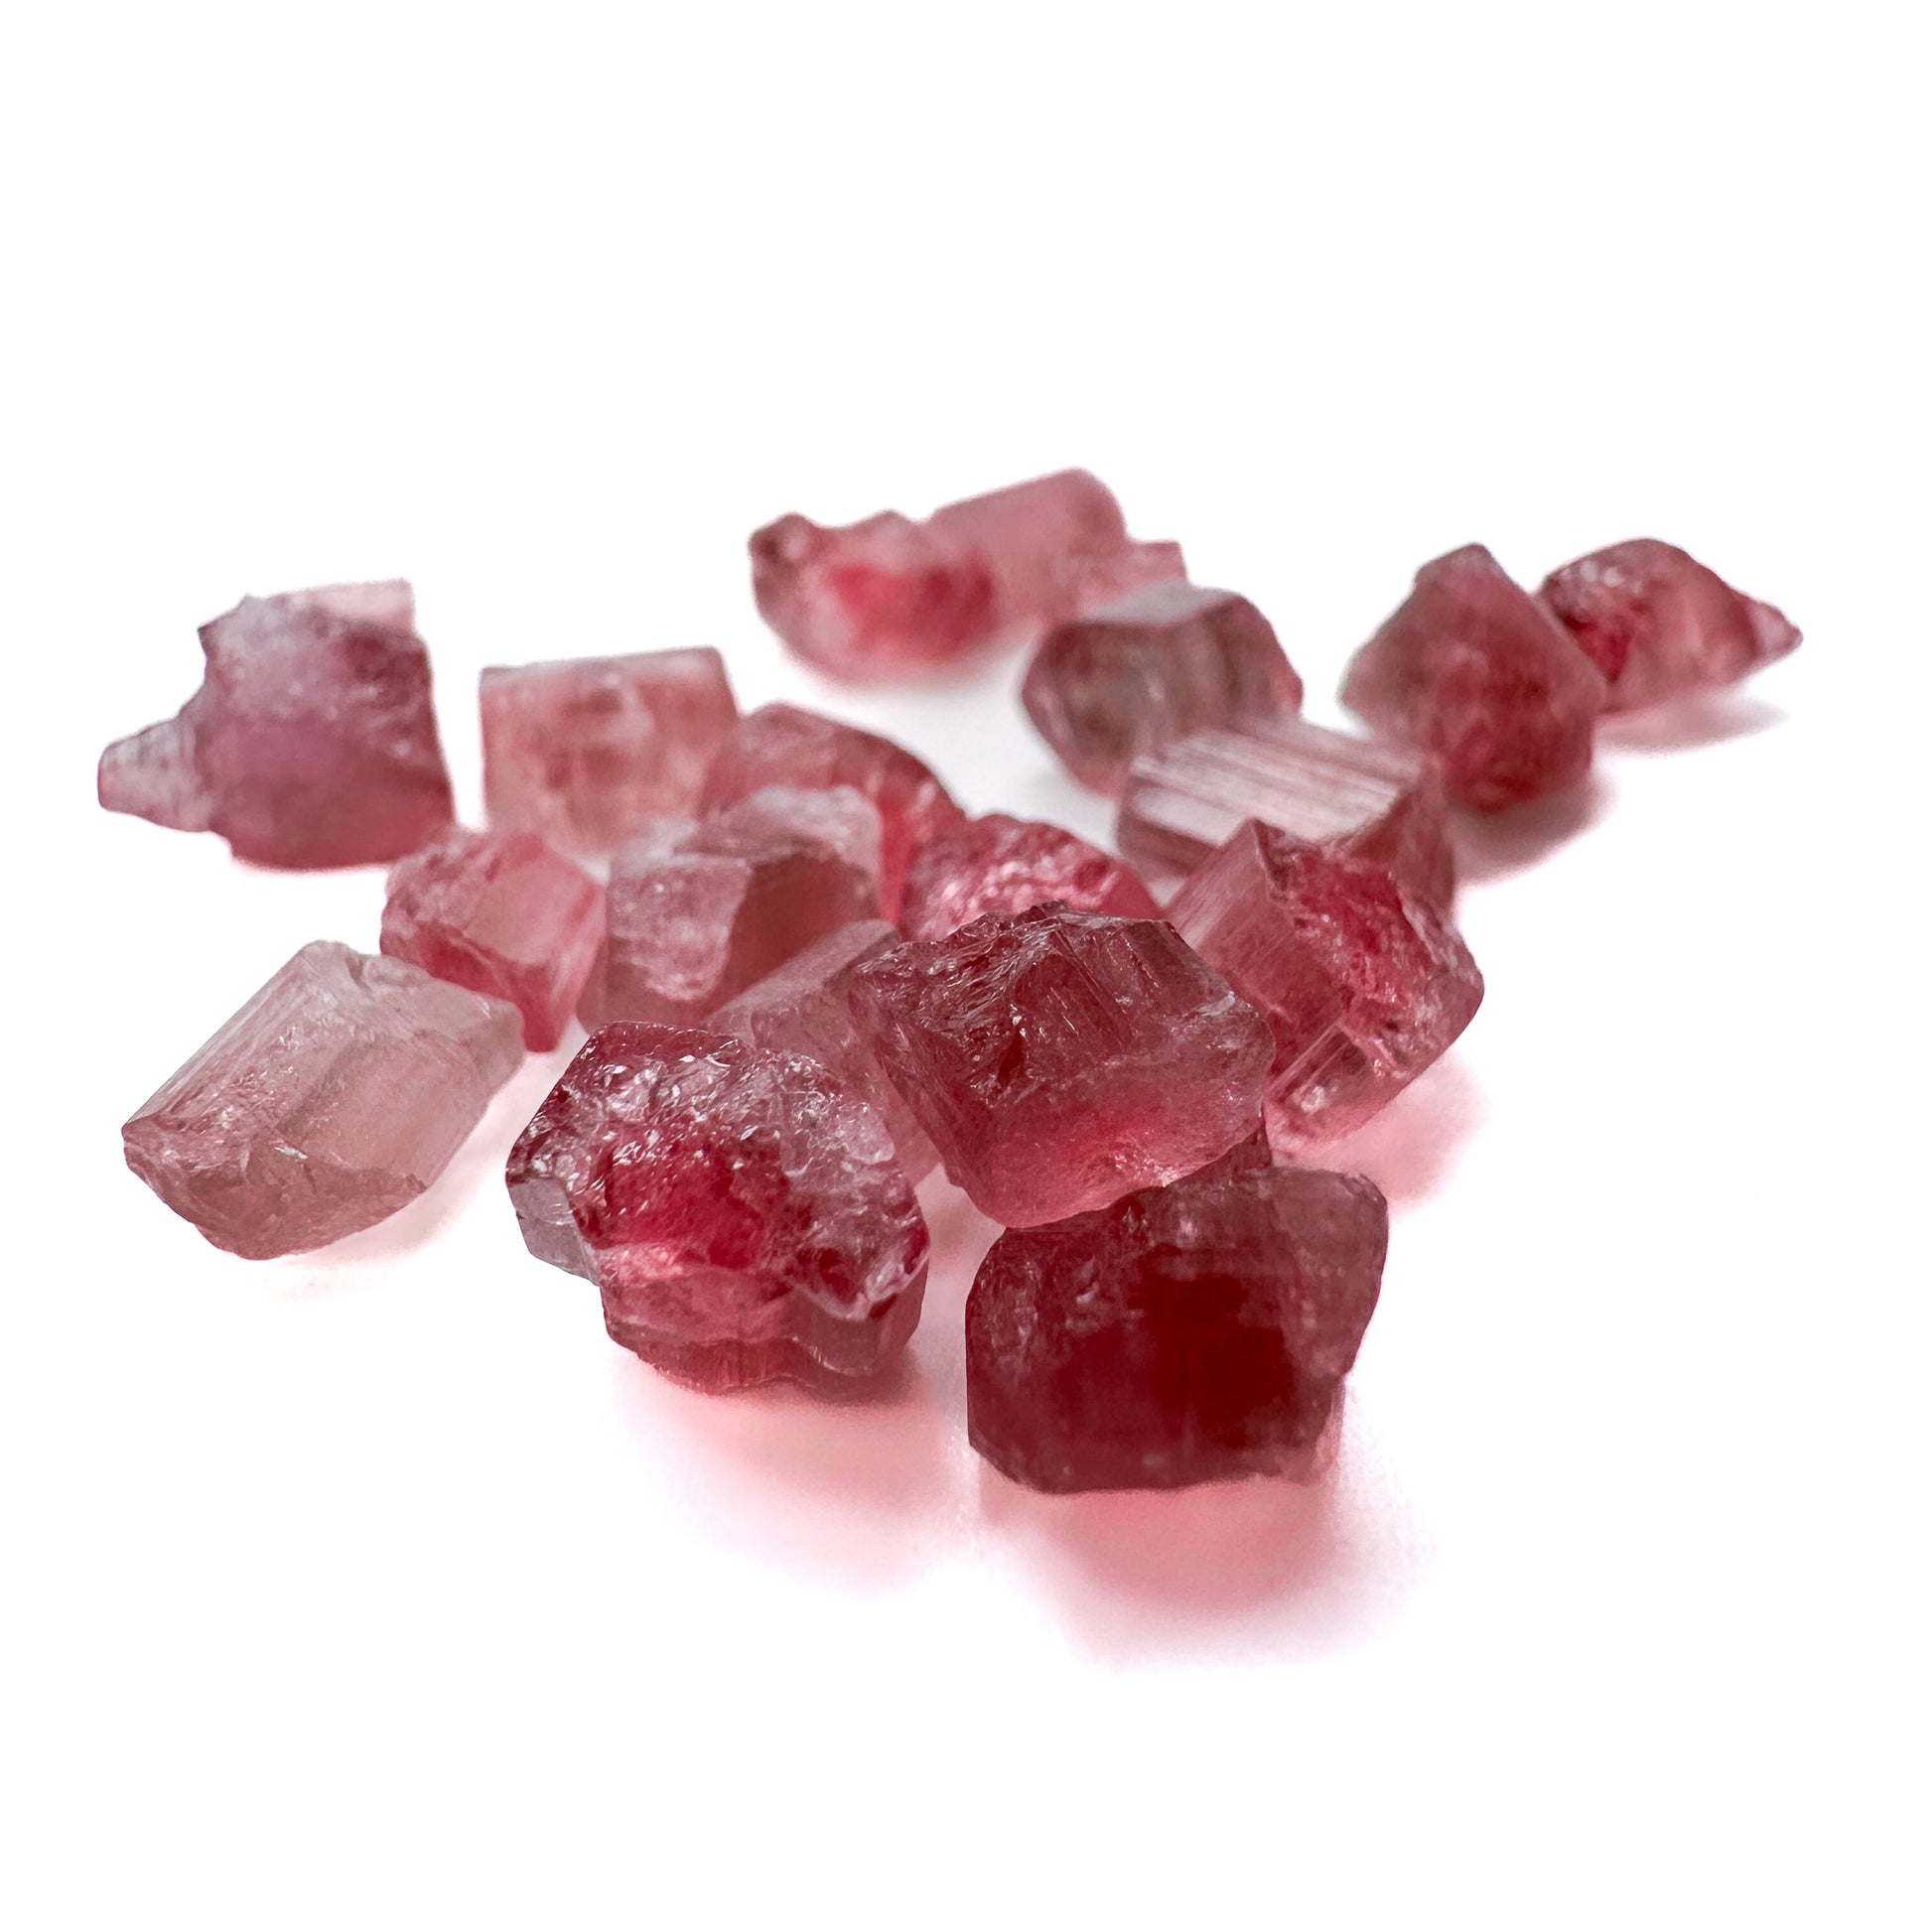 Natural Pink Rubellite Tourmaline Raw Crystal Specimen (3 Options) - 1 pc.-The Bead Gallery Honolulu